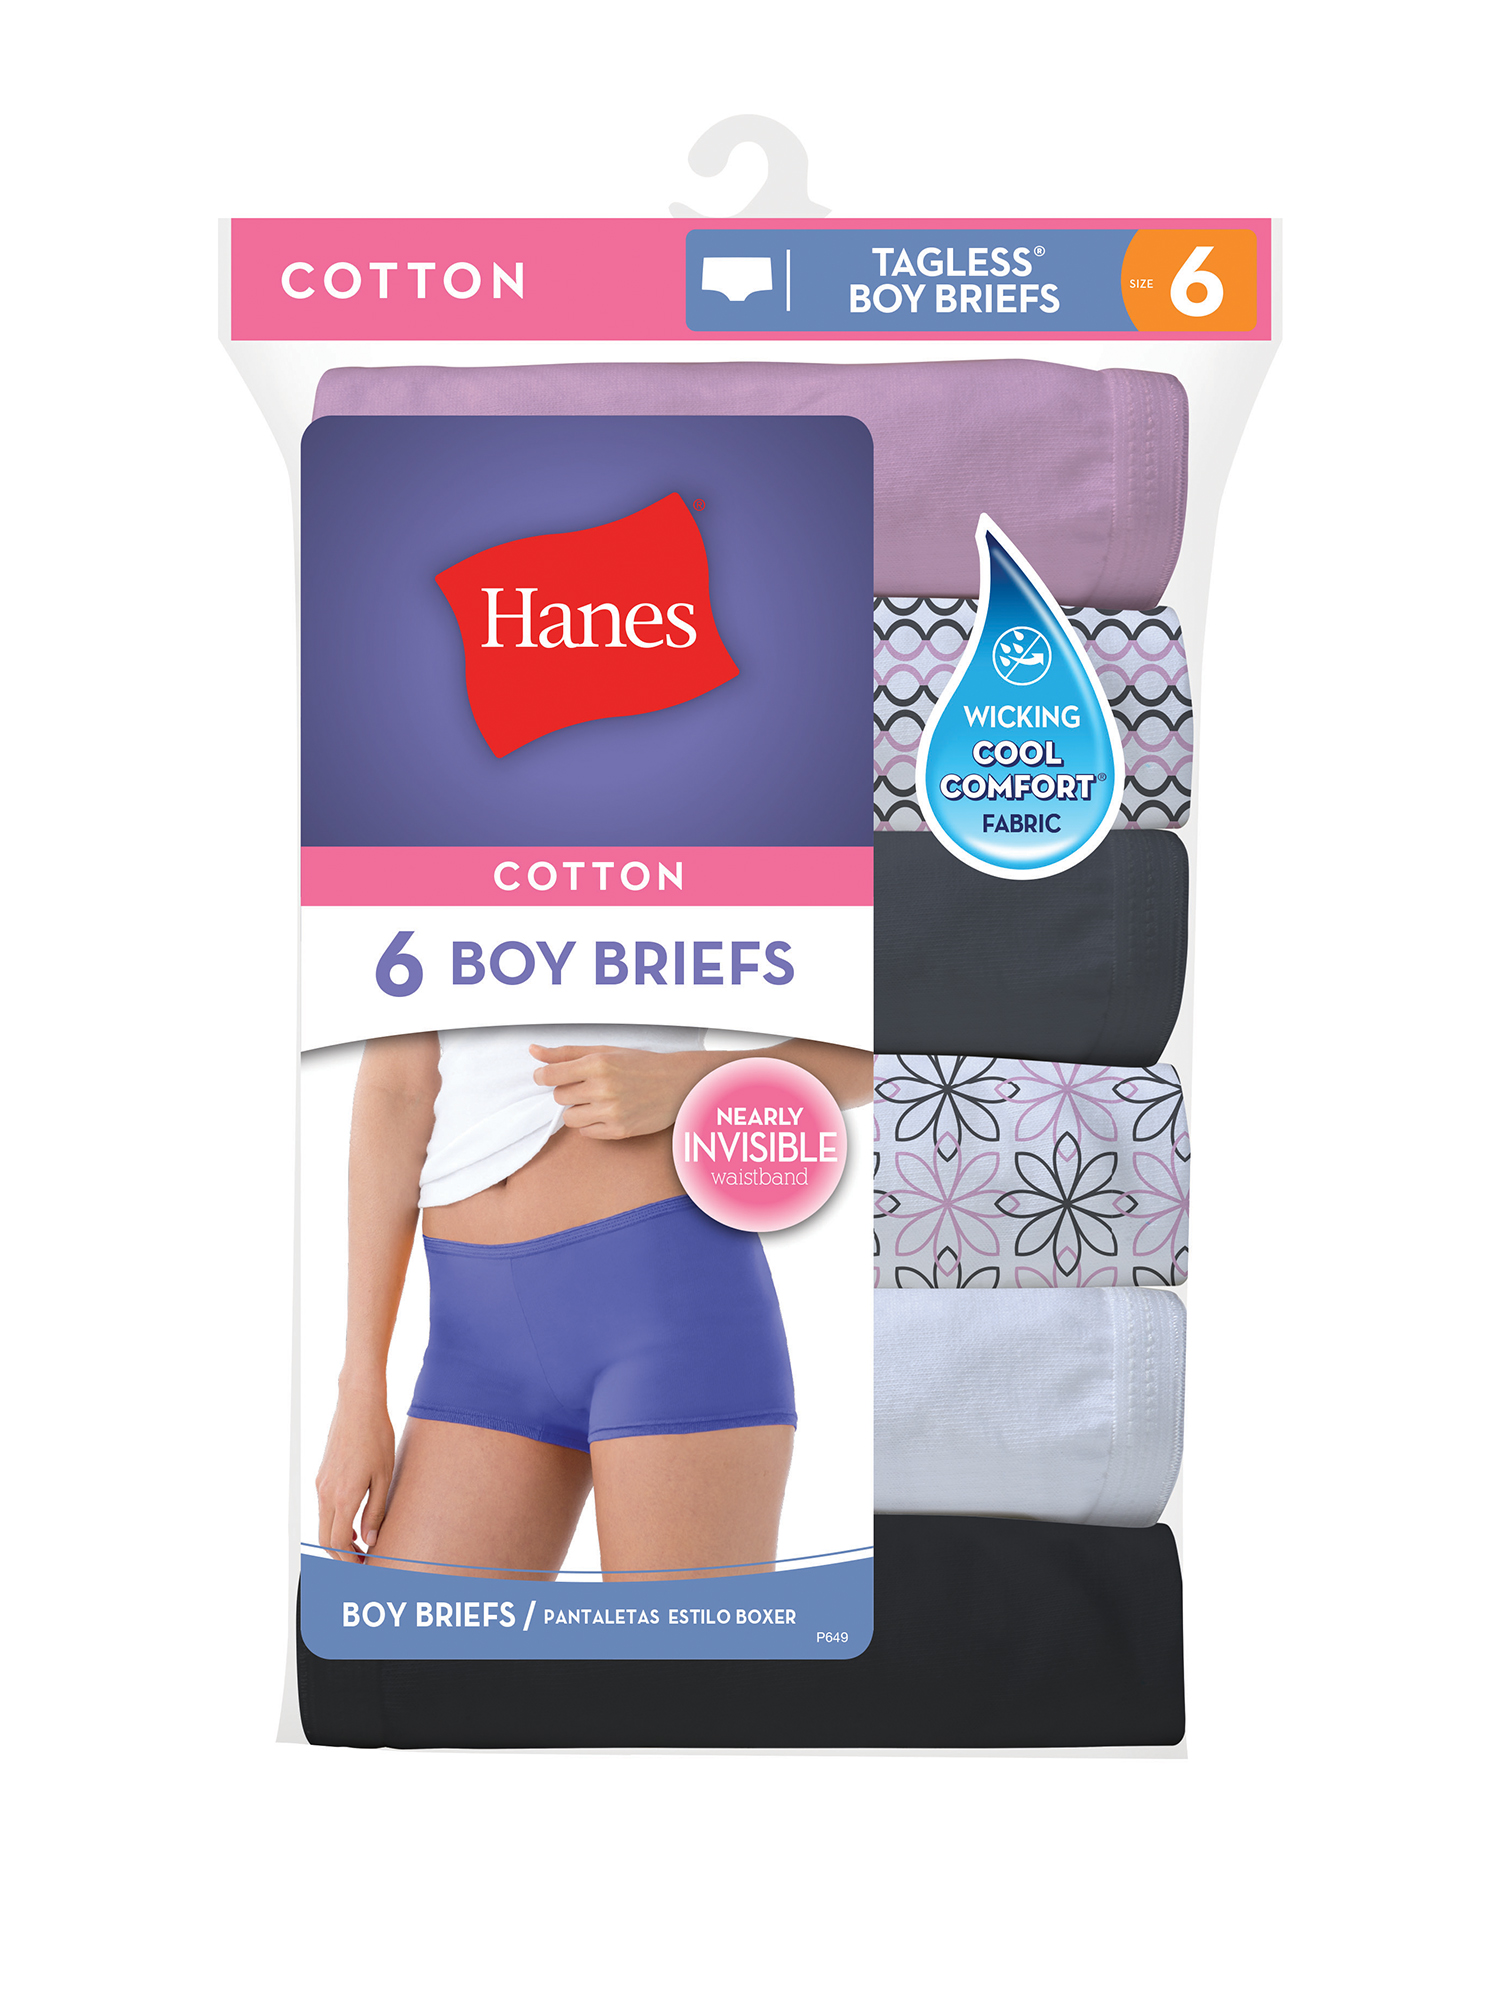 Hanes Women's cool comfort cotton boy brief, 6-pack - image 3 of 4